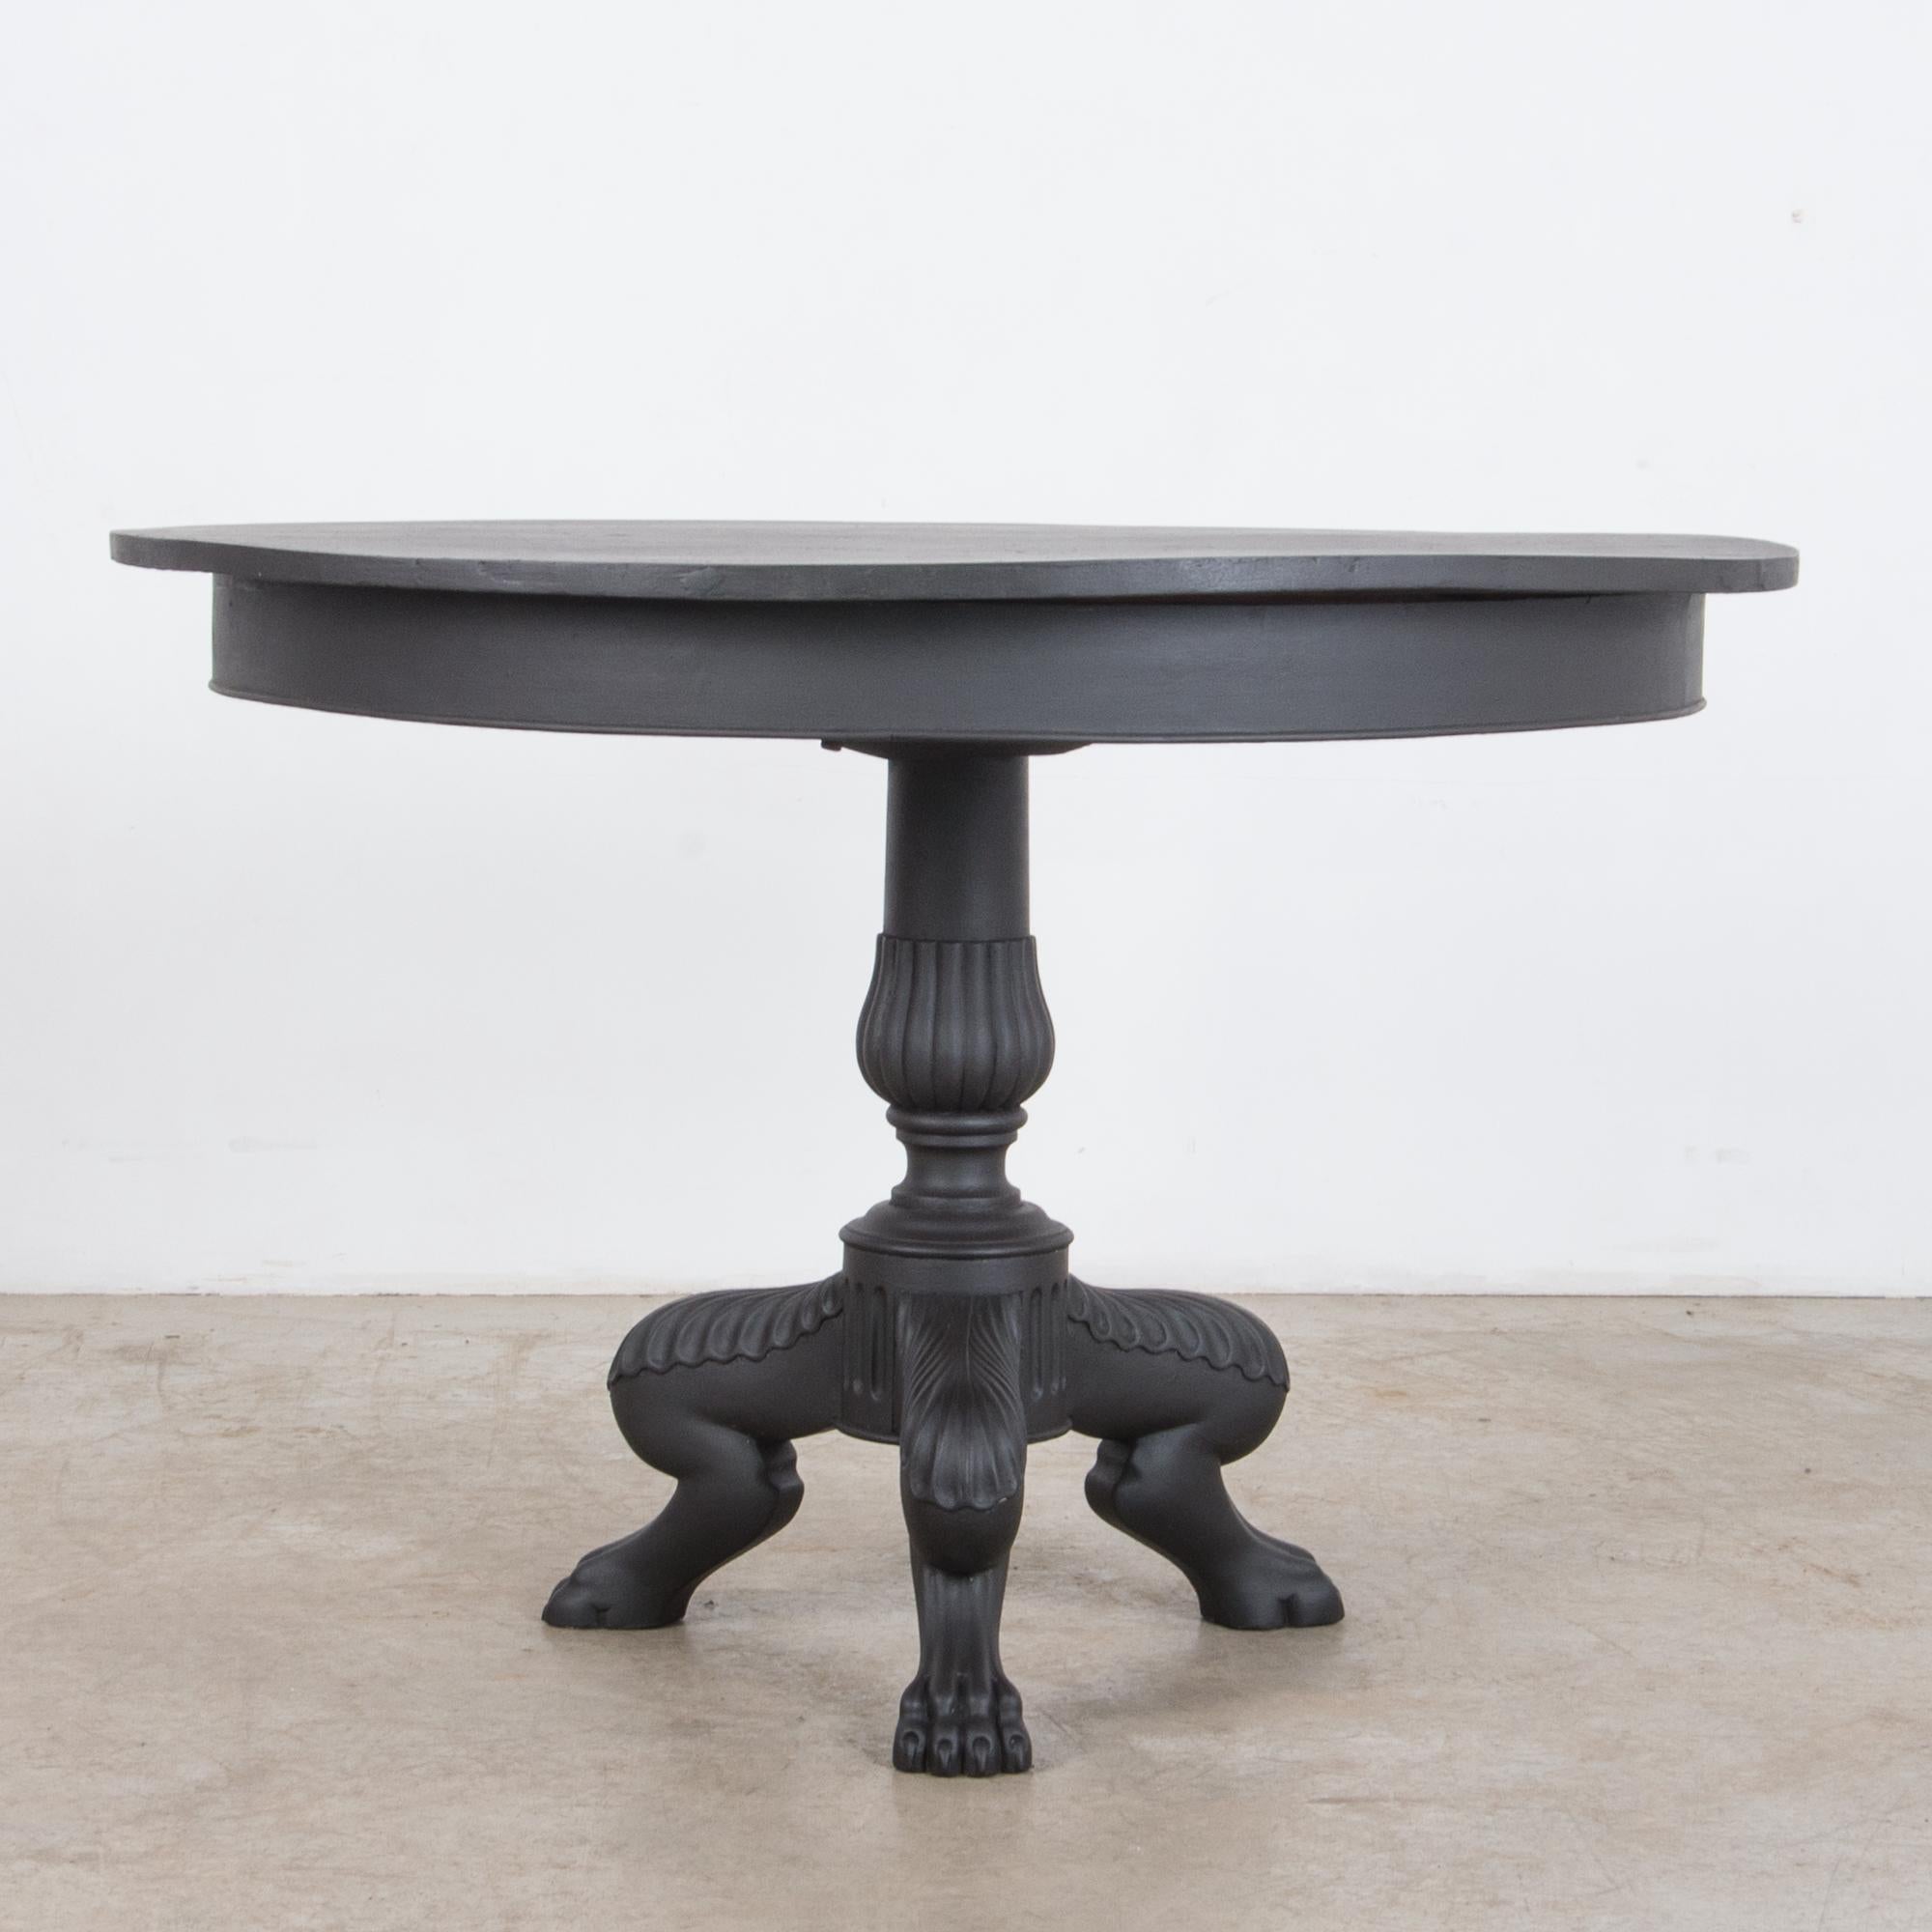 This figurative carved table is painted in contemporary matte black from France, circa 1820. A Provincial design, features a blend of styles with a neoclassical influence. Zoomorphic table legs and classical decorations are combined with a simple